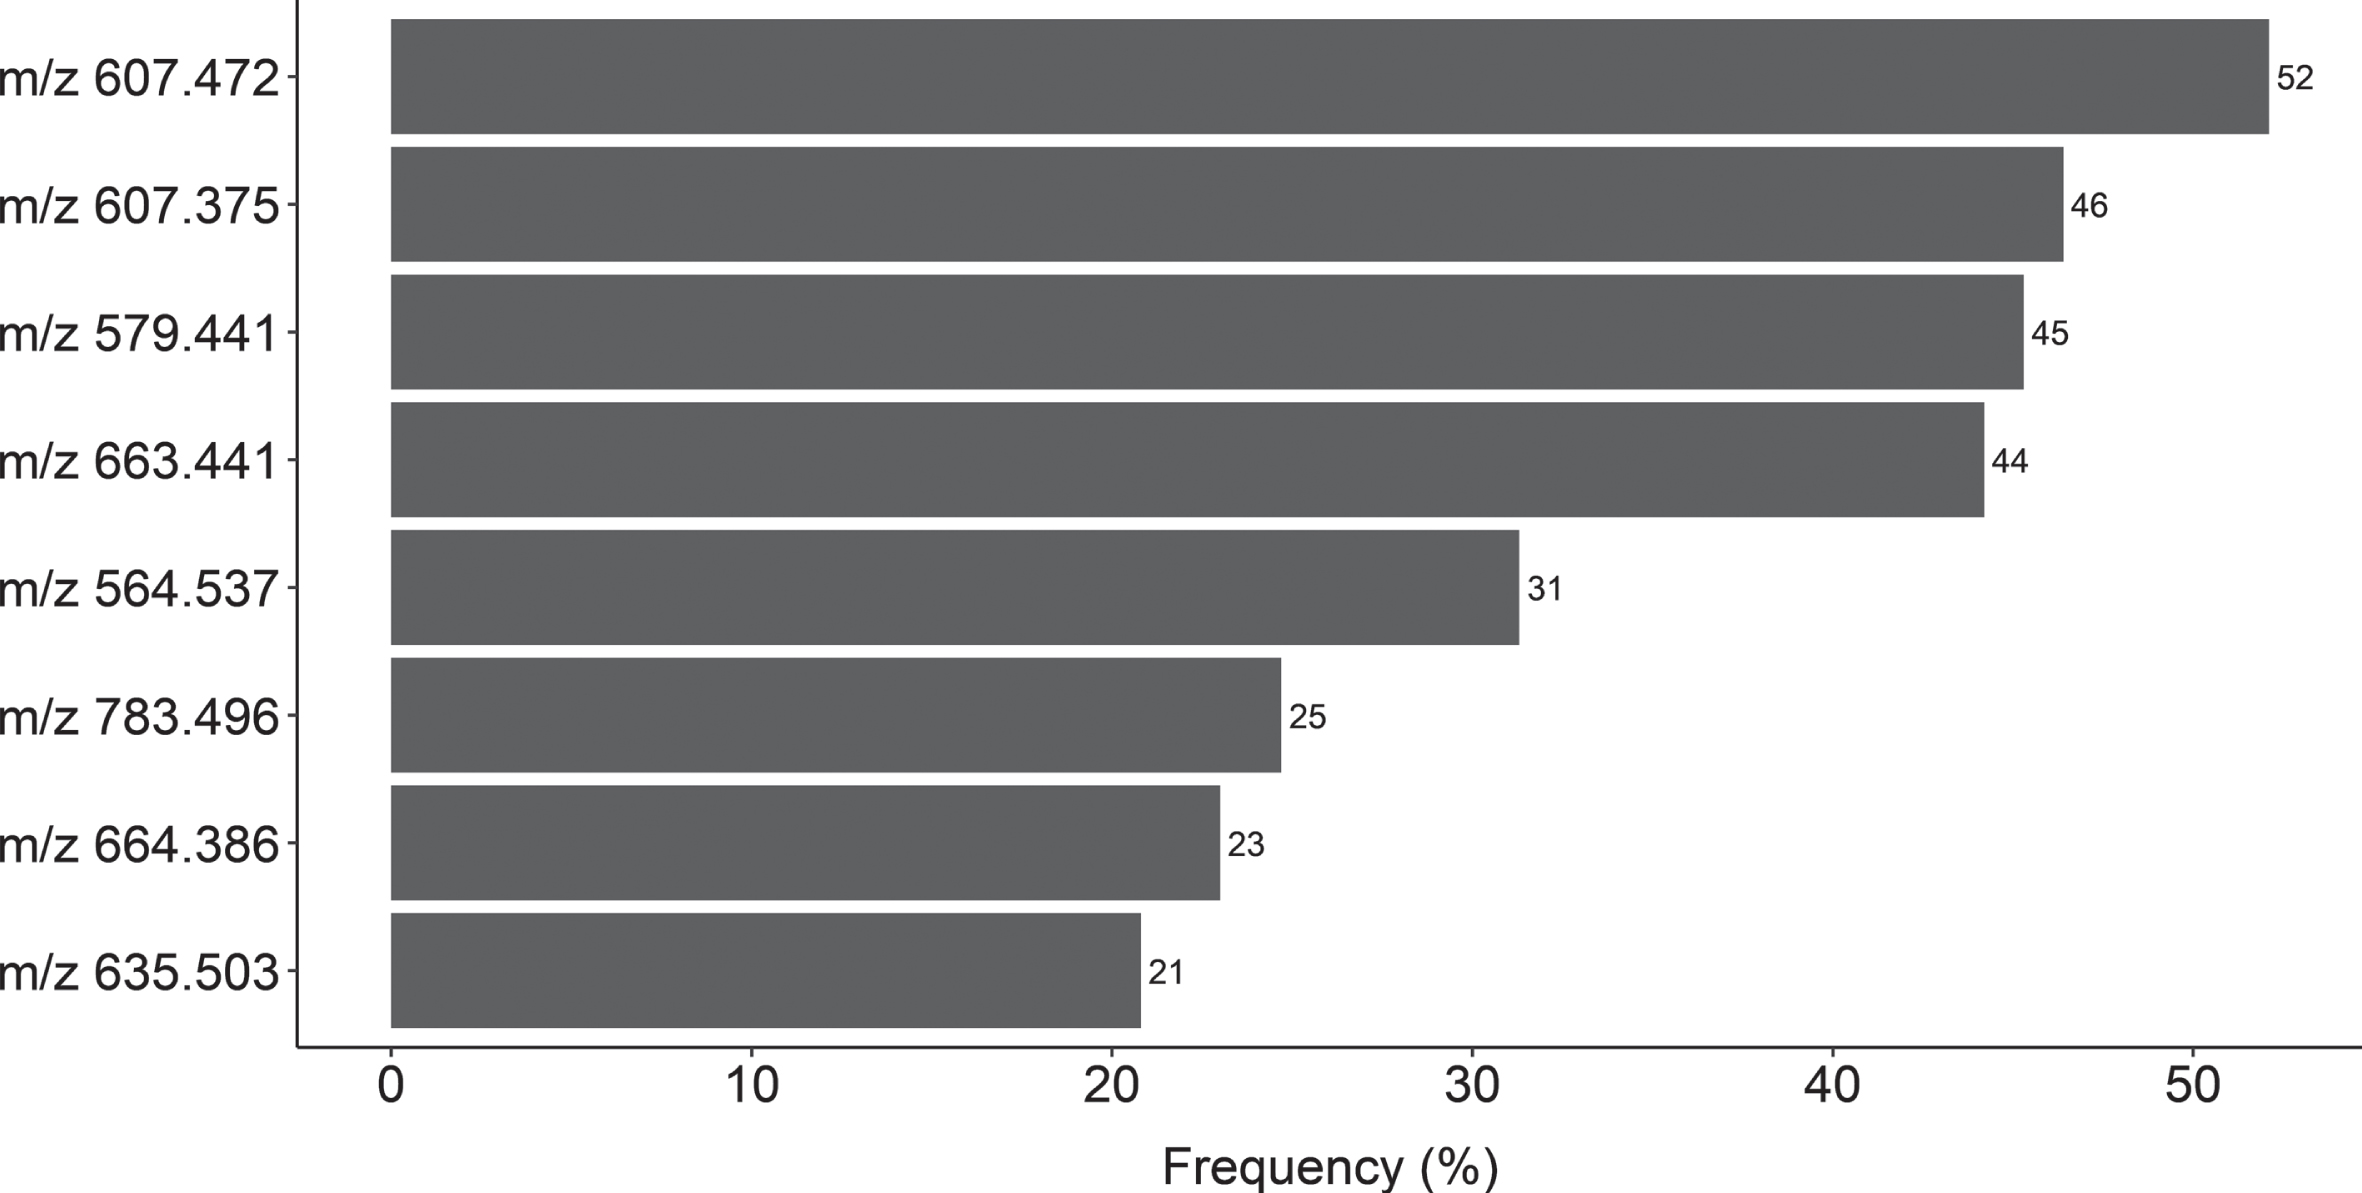 Frequencies of m/z features significantly distinguishing between CSF profiles (AD and non-AD) in both discovery and validation sets (p < 0.05) after 1000 bootstrap replications. A total of eight features with frequencies higher than 200 (20%) were selected for more detailed identification.